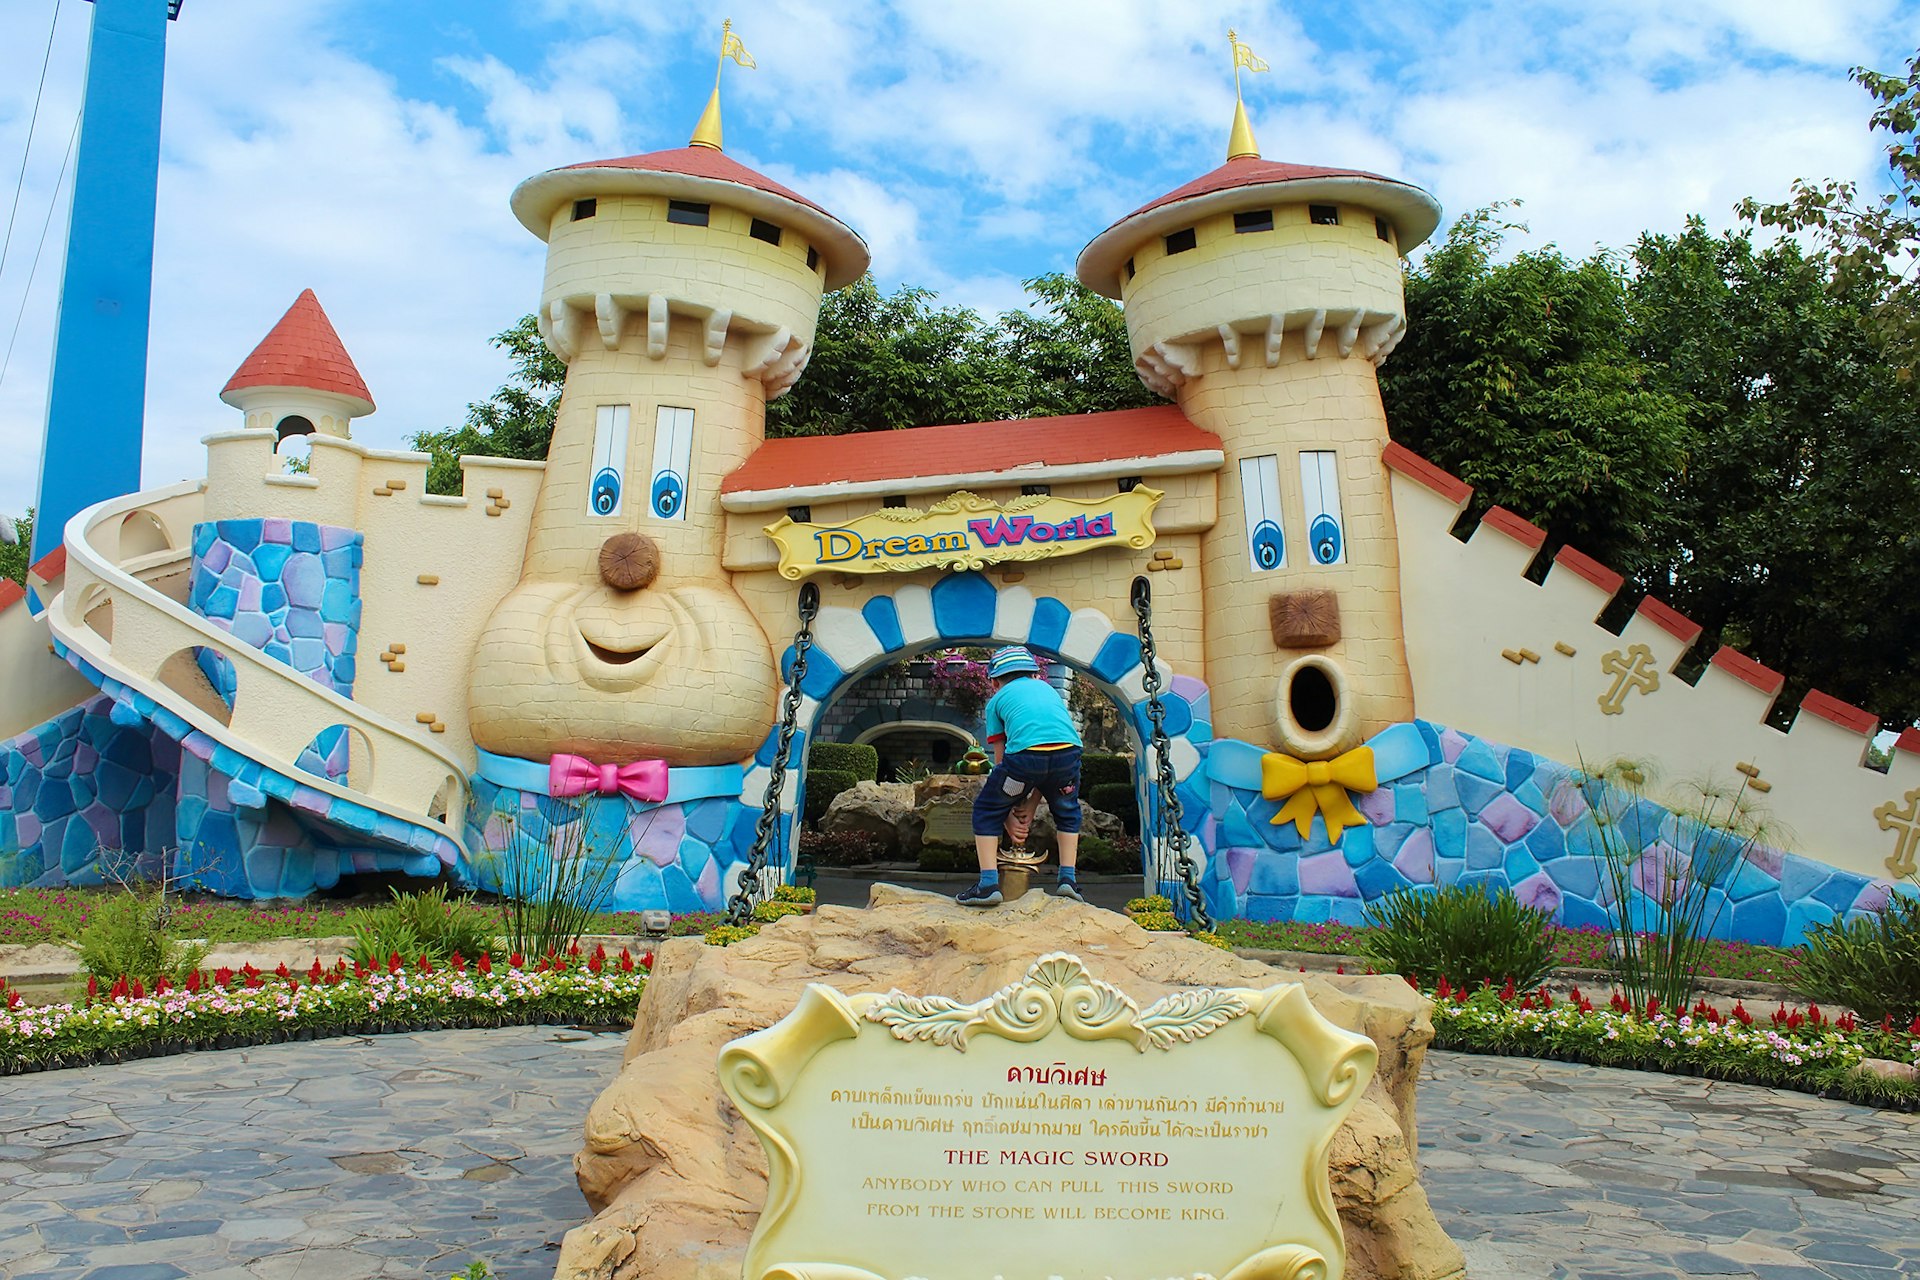 The entranceway to Dream World amusement park in Bangkok includes a large cartoon-ish castle with big smiling faces on them as a child gets ready to enter.